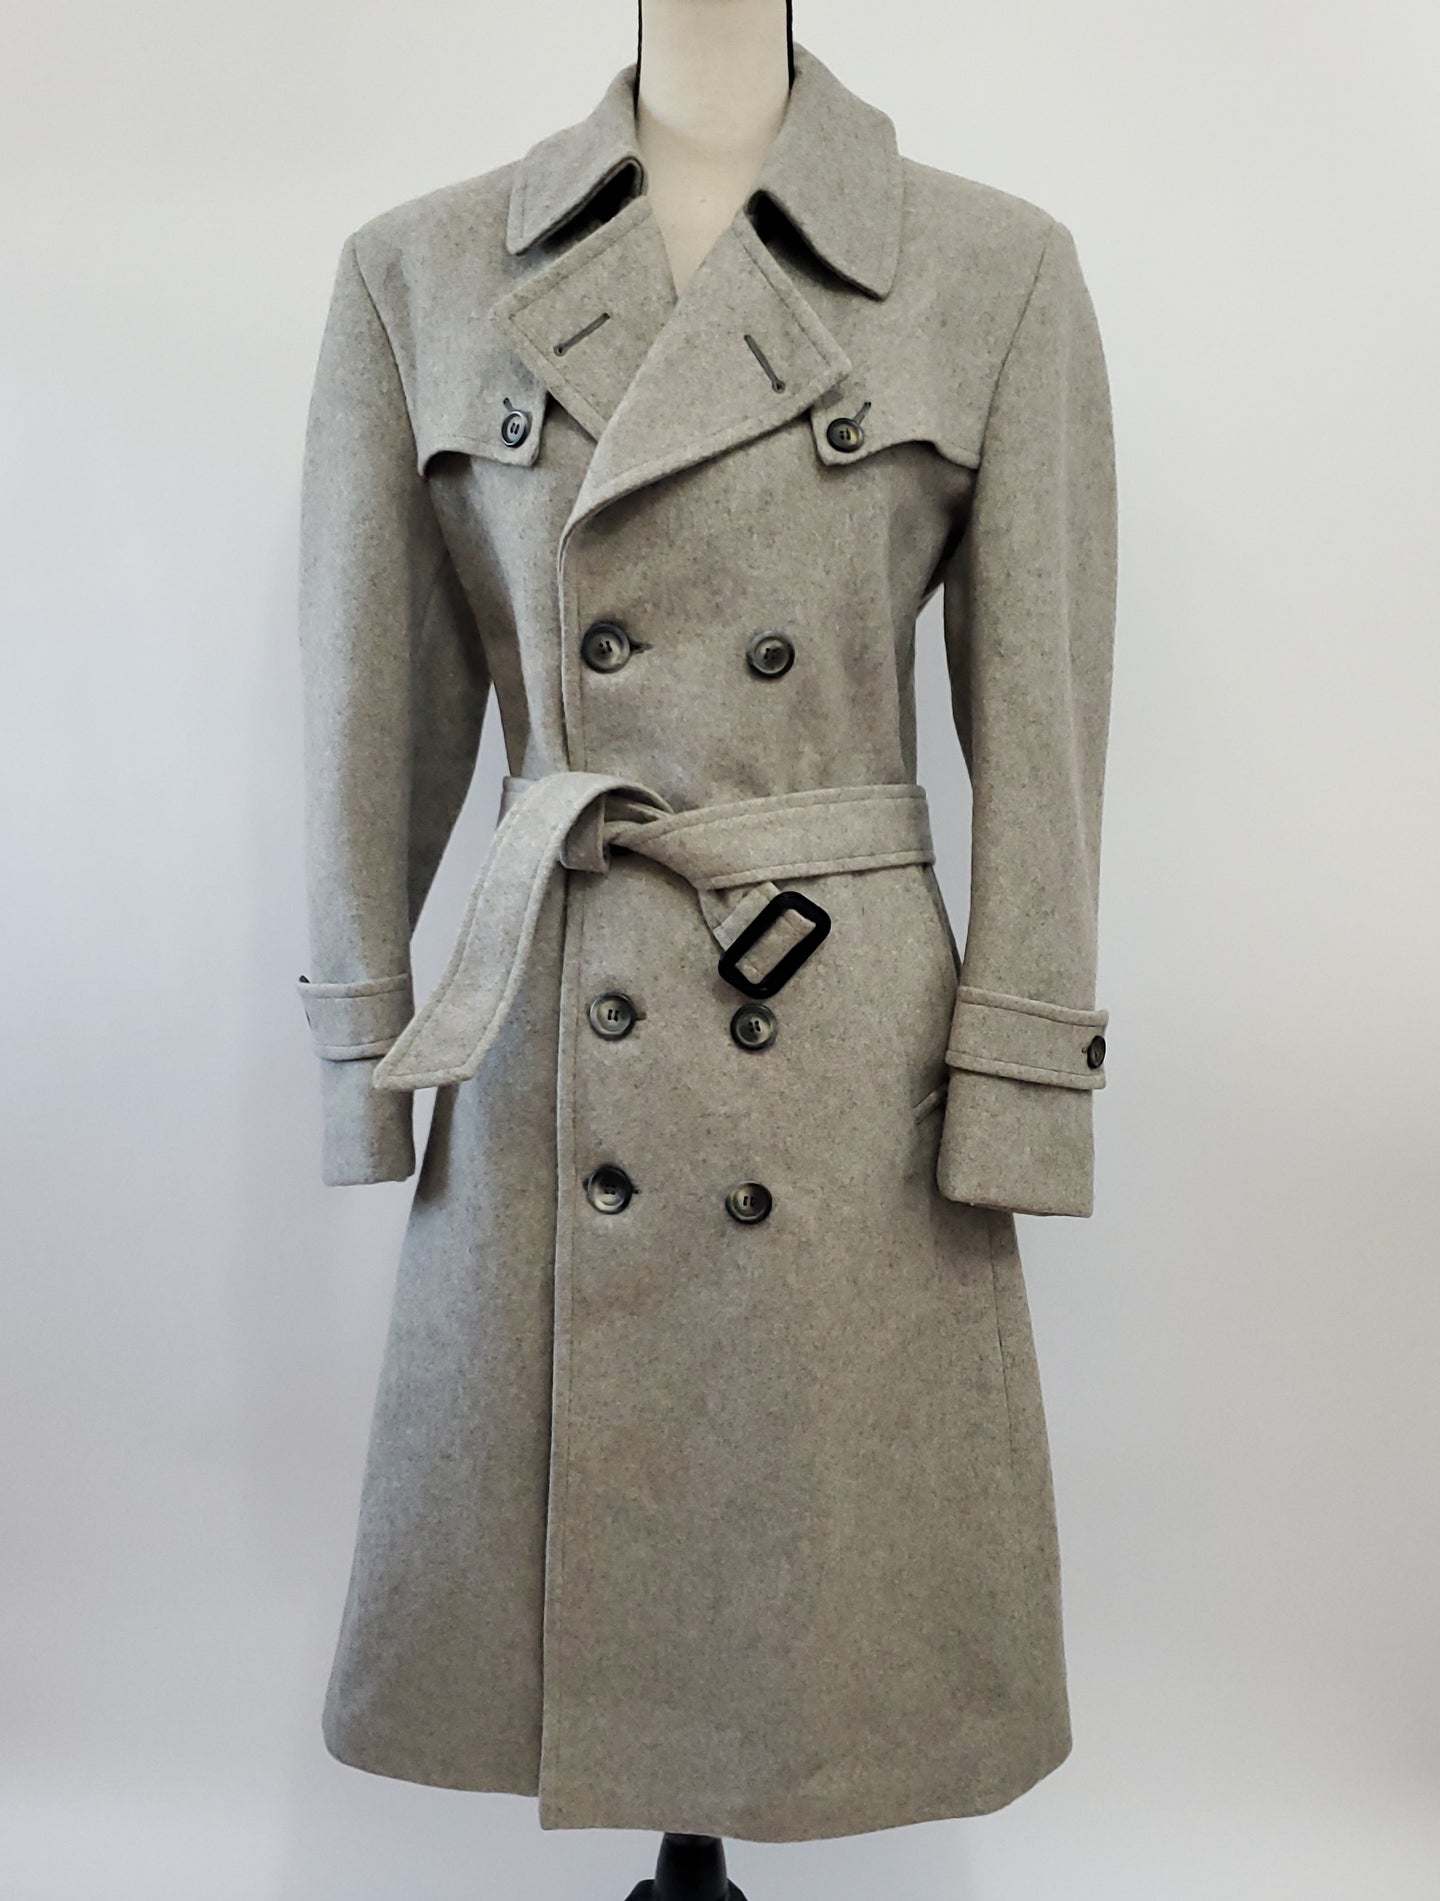 Vintage Double Breasted Wool Coat Belted - Size Medium